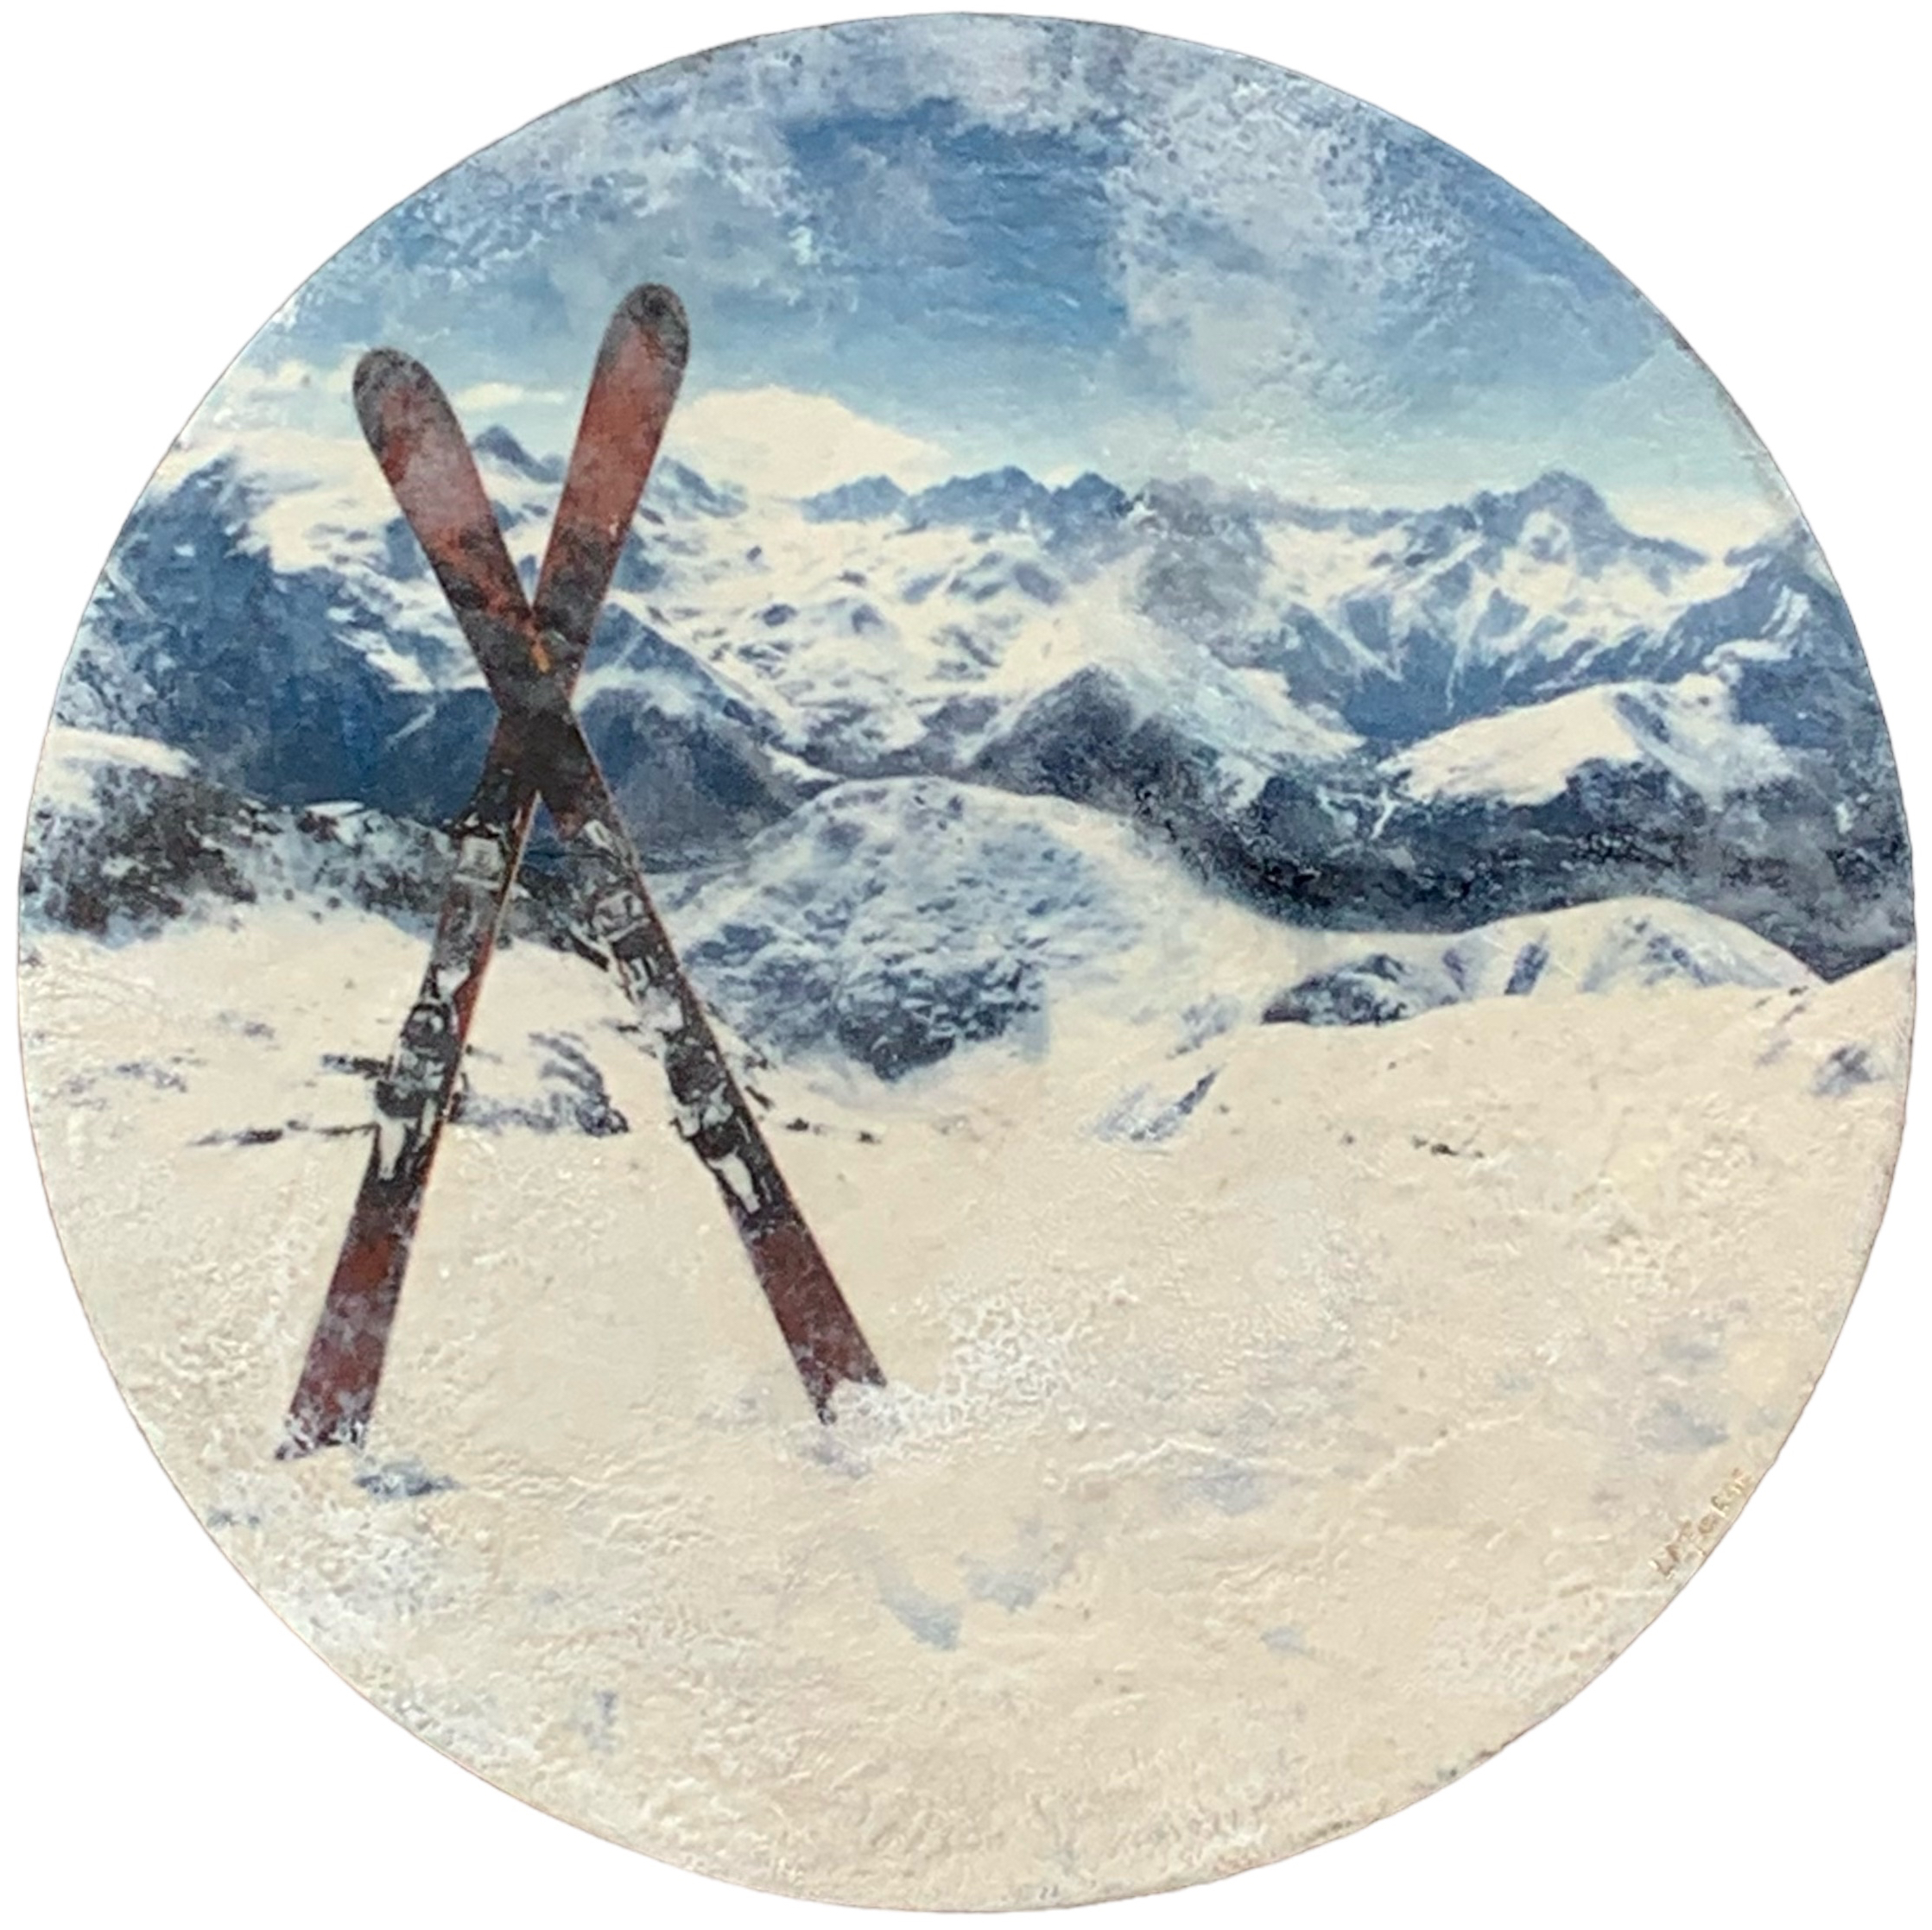 Ski Country, encaustic skis in the snow on a mountain painting by Lee Anne LaForge at Effusion Art Gallery in Invermere, BC